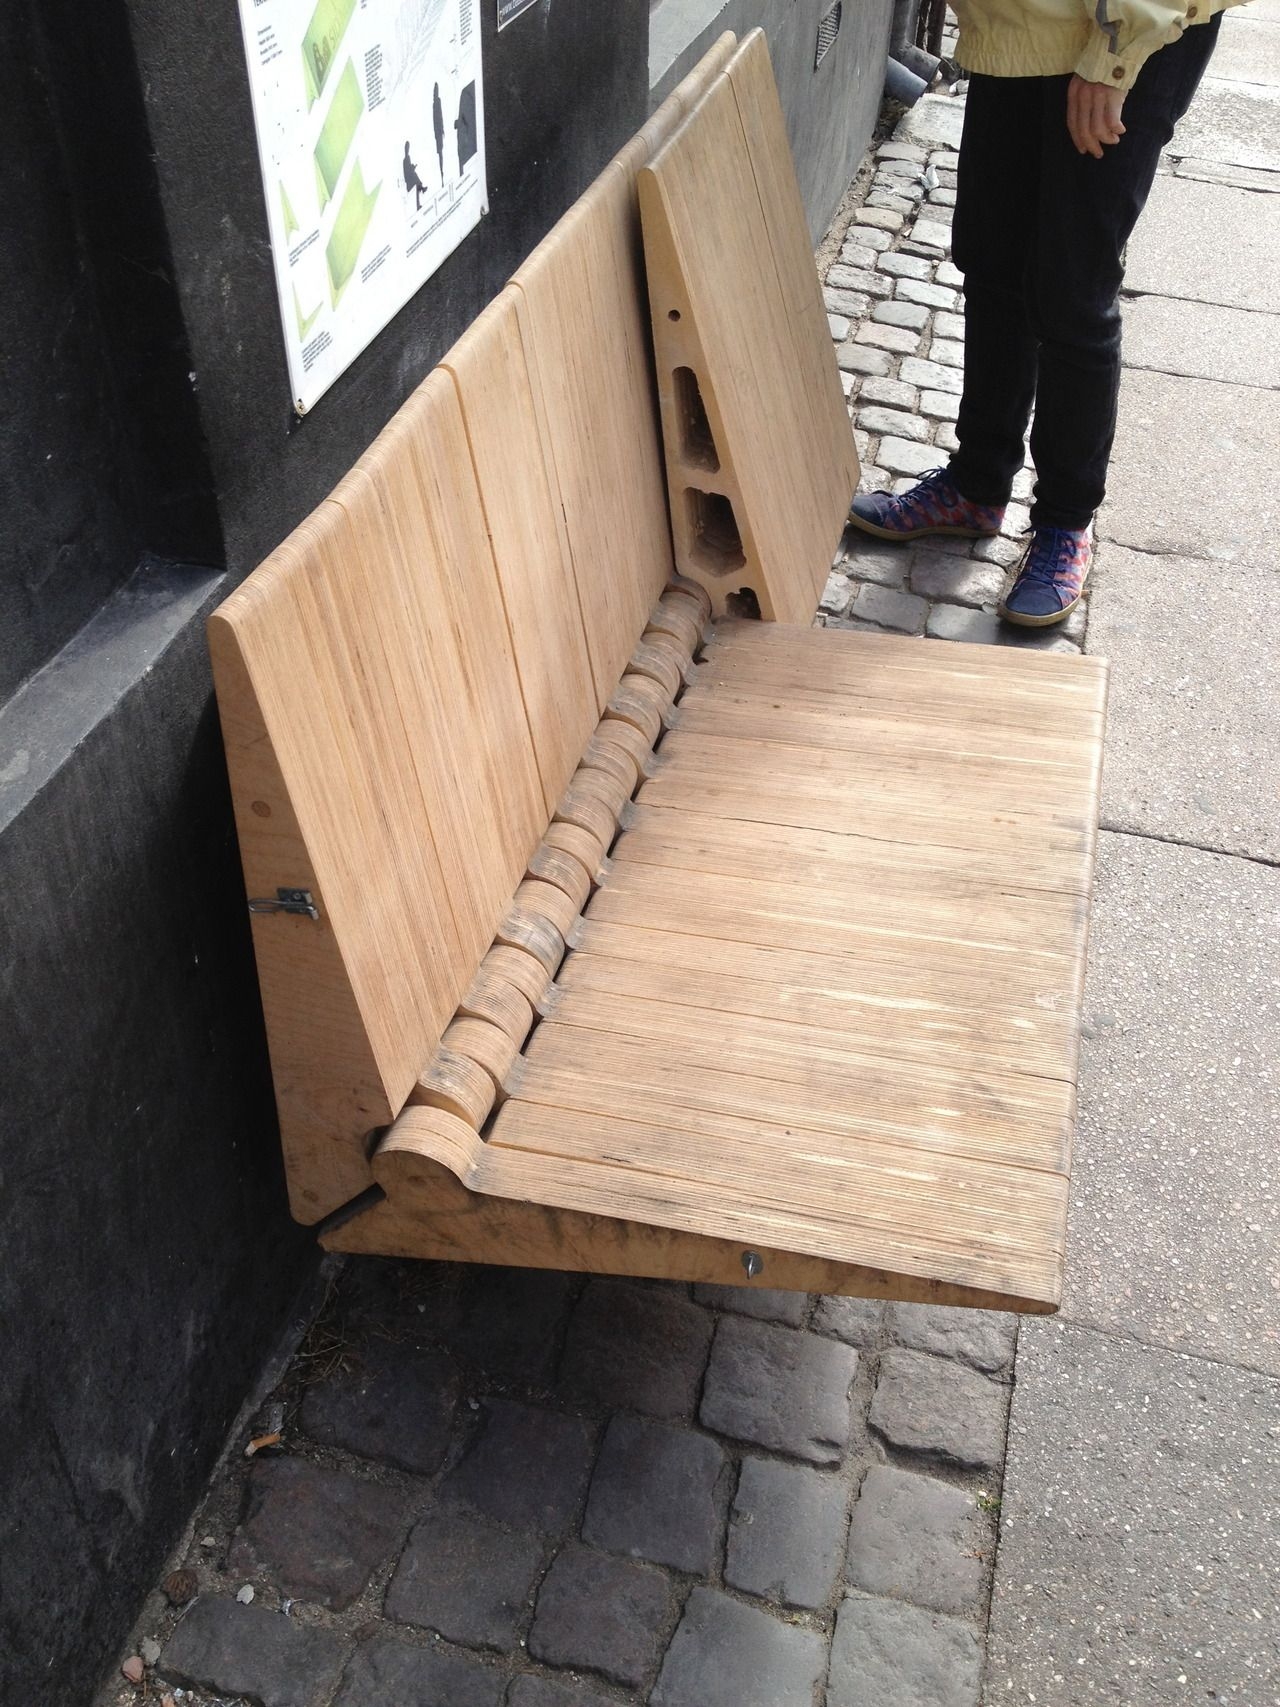 Folding benches